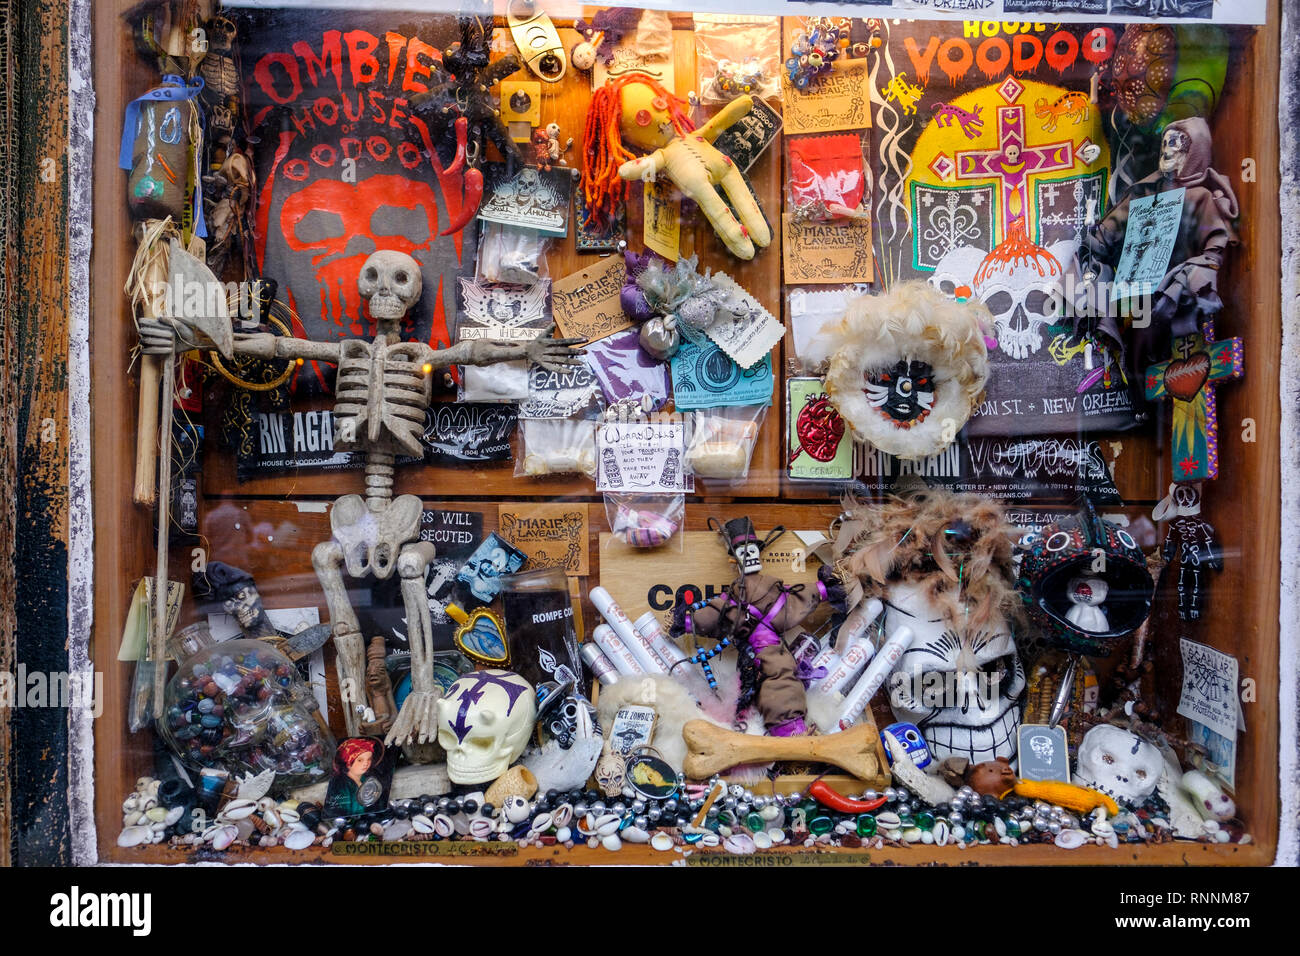 Reverend Zombie's House of Voodoo store window, voodoo dolls, religious artifacts, New Orleans French Quarter New Orleans, Louisiana, USA Stock Photo